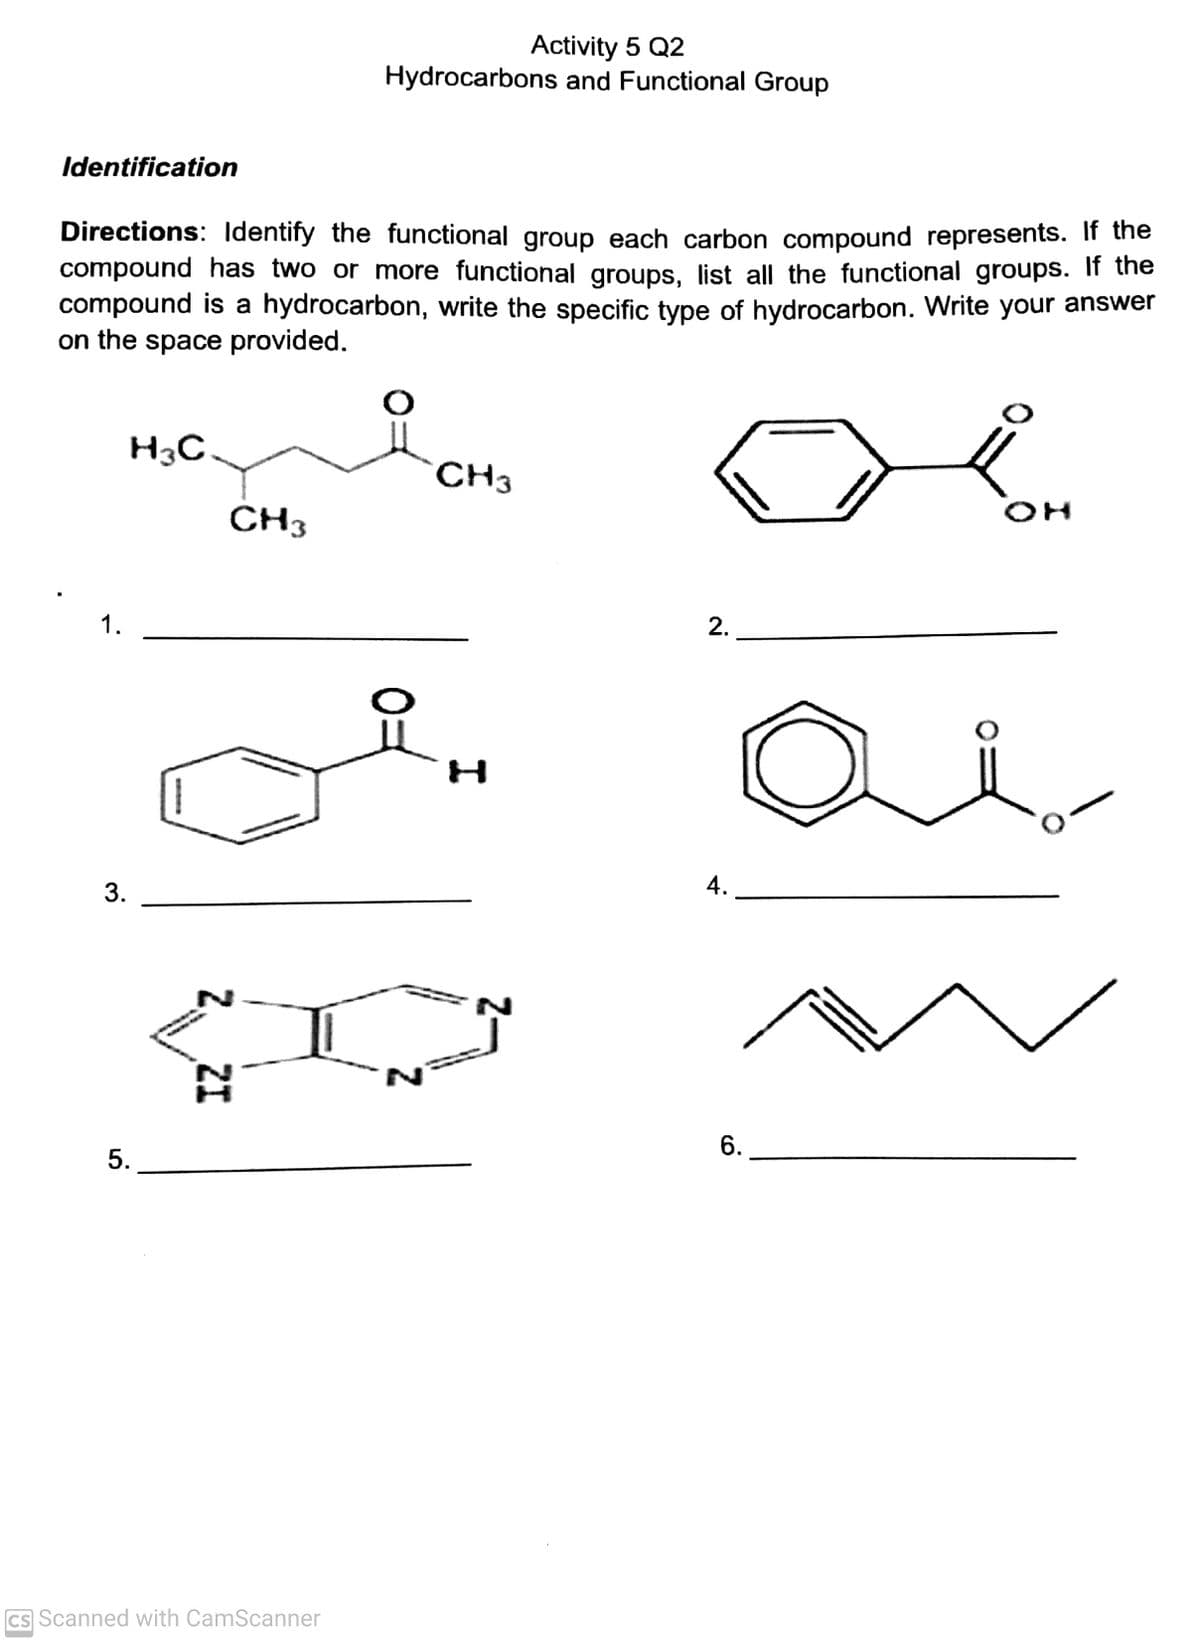 Activity 5 Q2
Hydrocarbons and Functional Group
Identification
Directions: Identify the functional group each carbon compound represents. If the
compound has two or more functional groups, list all the functional groups. If the
compound is a hydrocarbon, write the specific type of hydrocarbon. Write your answer
on the space provided.
H3C
CH3
CH3
2.
1.
A.
6.
Cs Scanned with CamScanner
2, ZI
3.
5.
